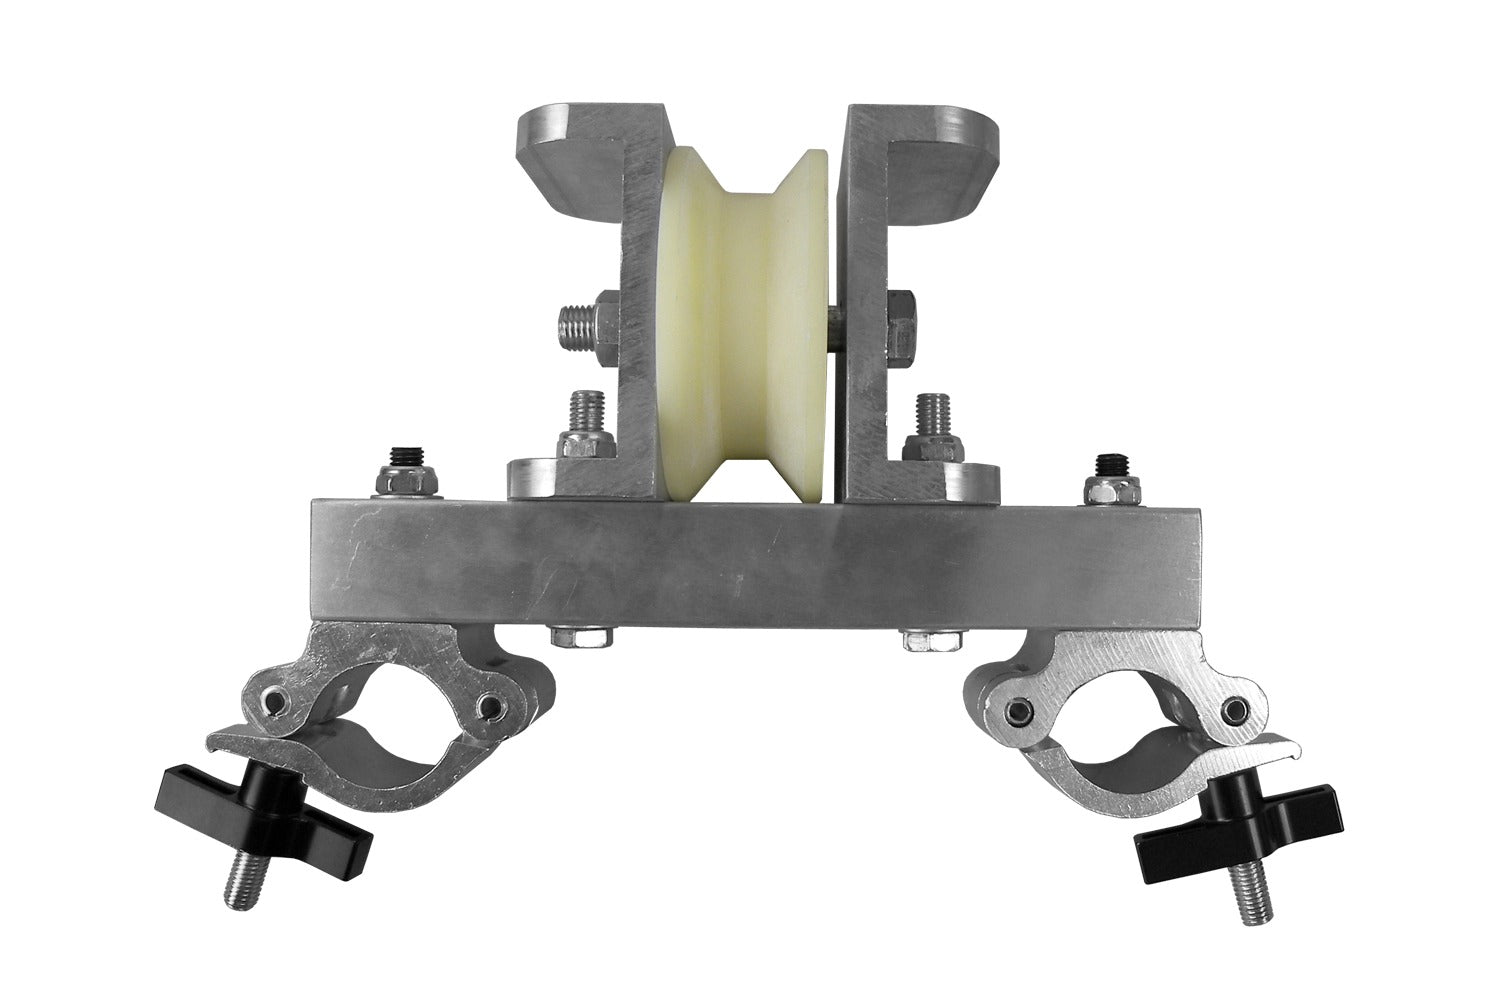 T3BD2CURVED-W - Wheels connection adaptor for curved box truss